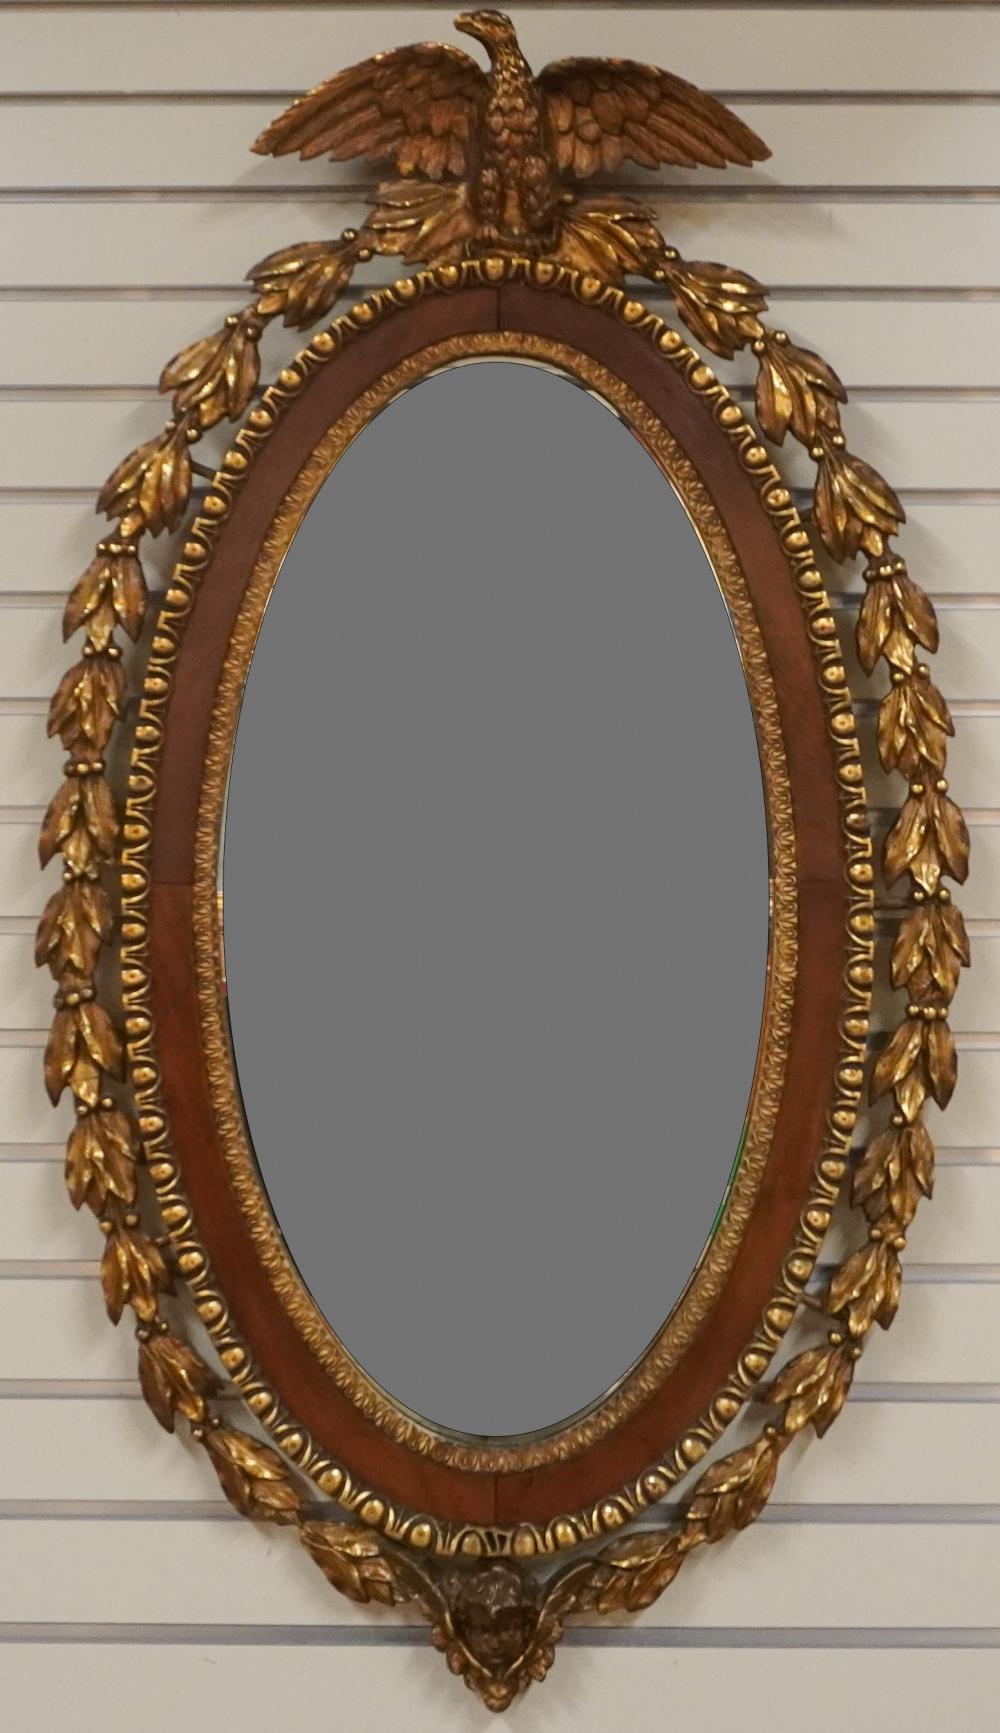 FEDERAL STYLE GILT GESSO AND WOOD